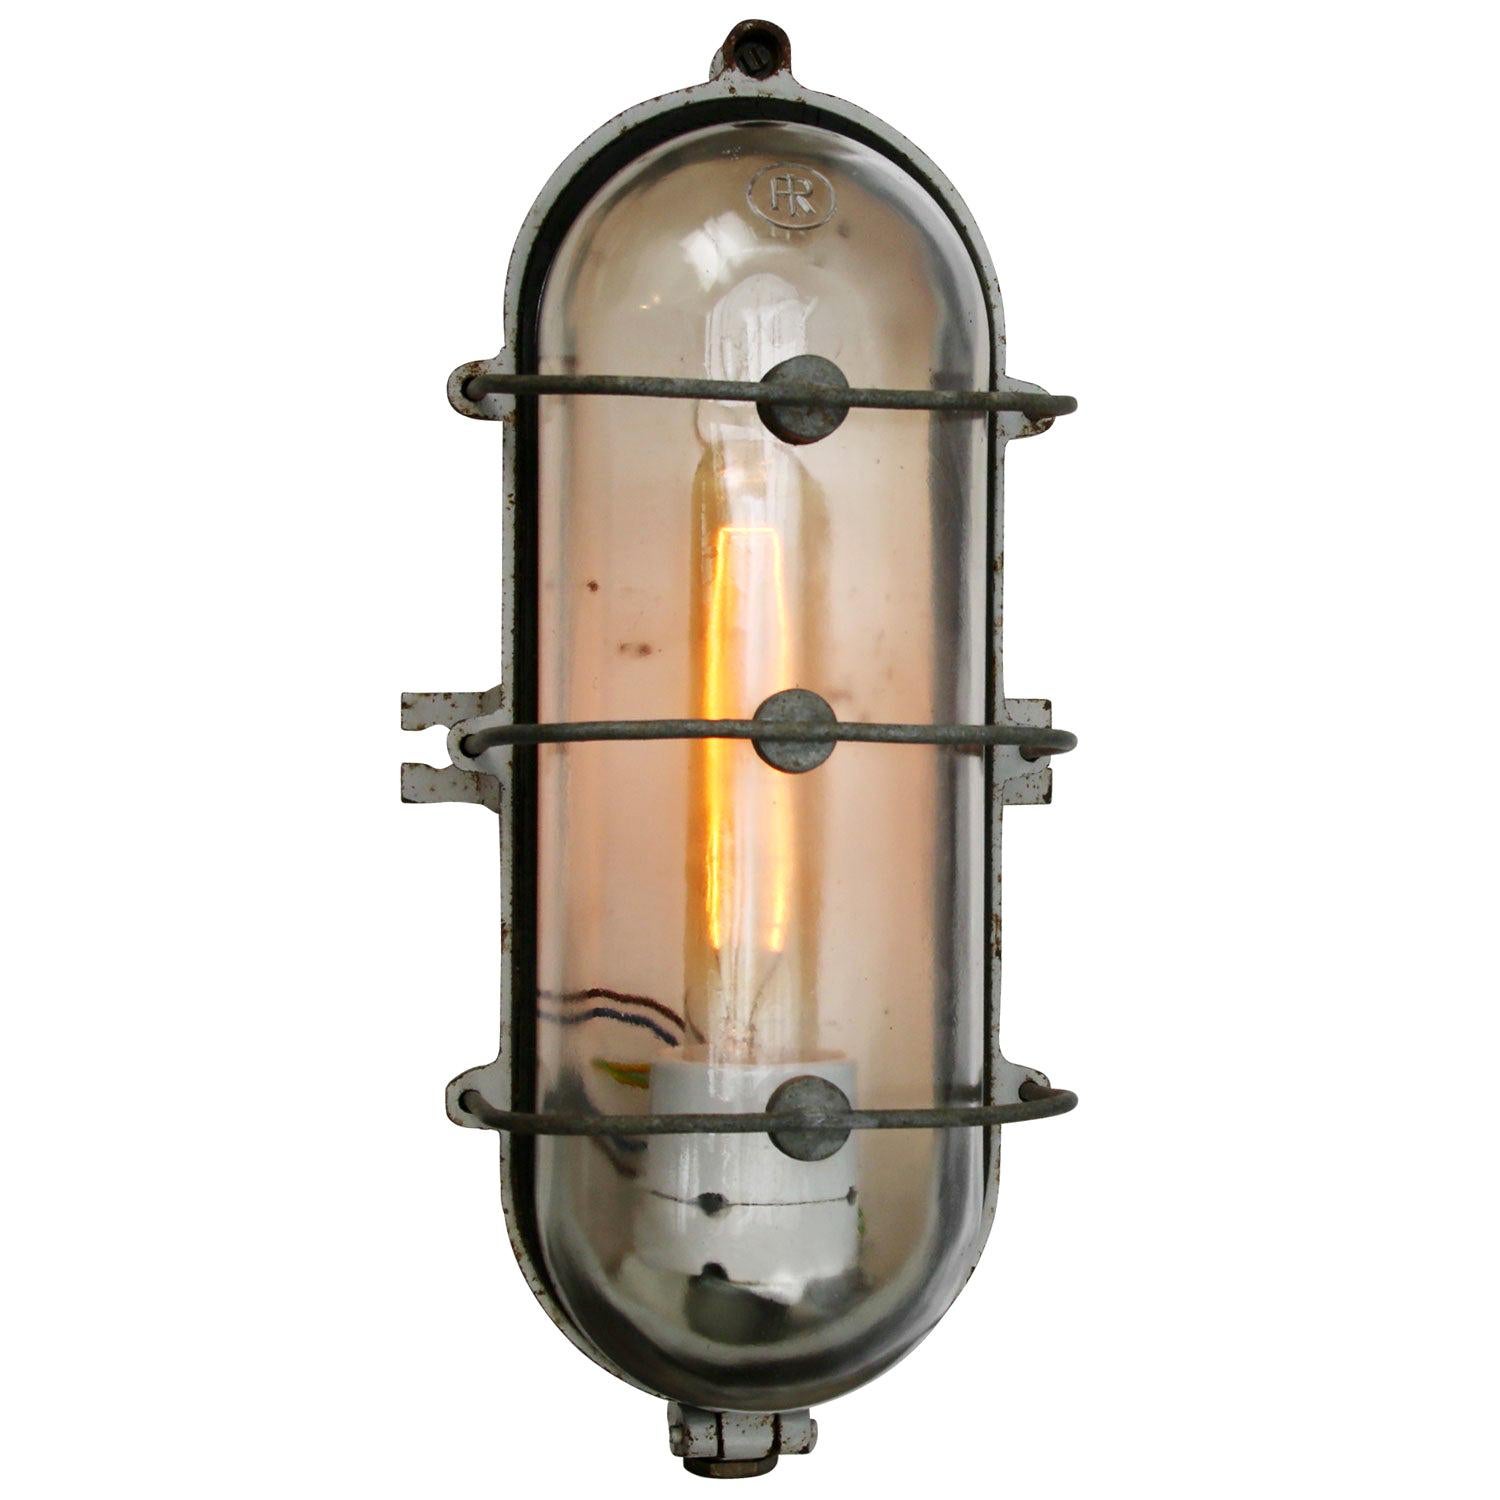 Industrial wall ceiling scones
cast iron clear glass

Weight: 2.78 kg / 6.1 lb

Priced per individual item. All lamps have been made suitable by international standards for incandescent light bulbs, energy-efficient and LED bulbs. E26/E27 bulb